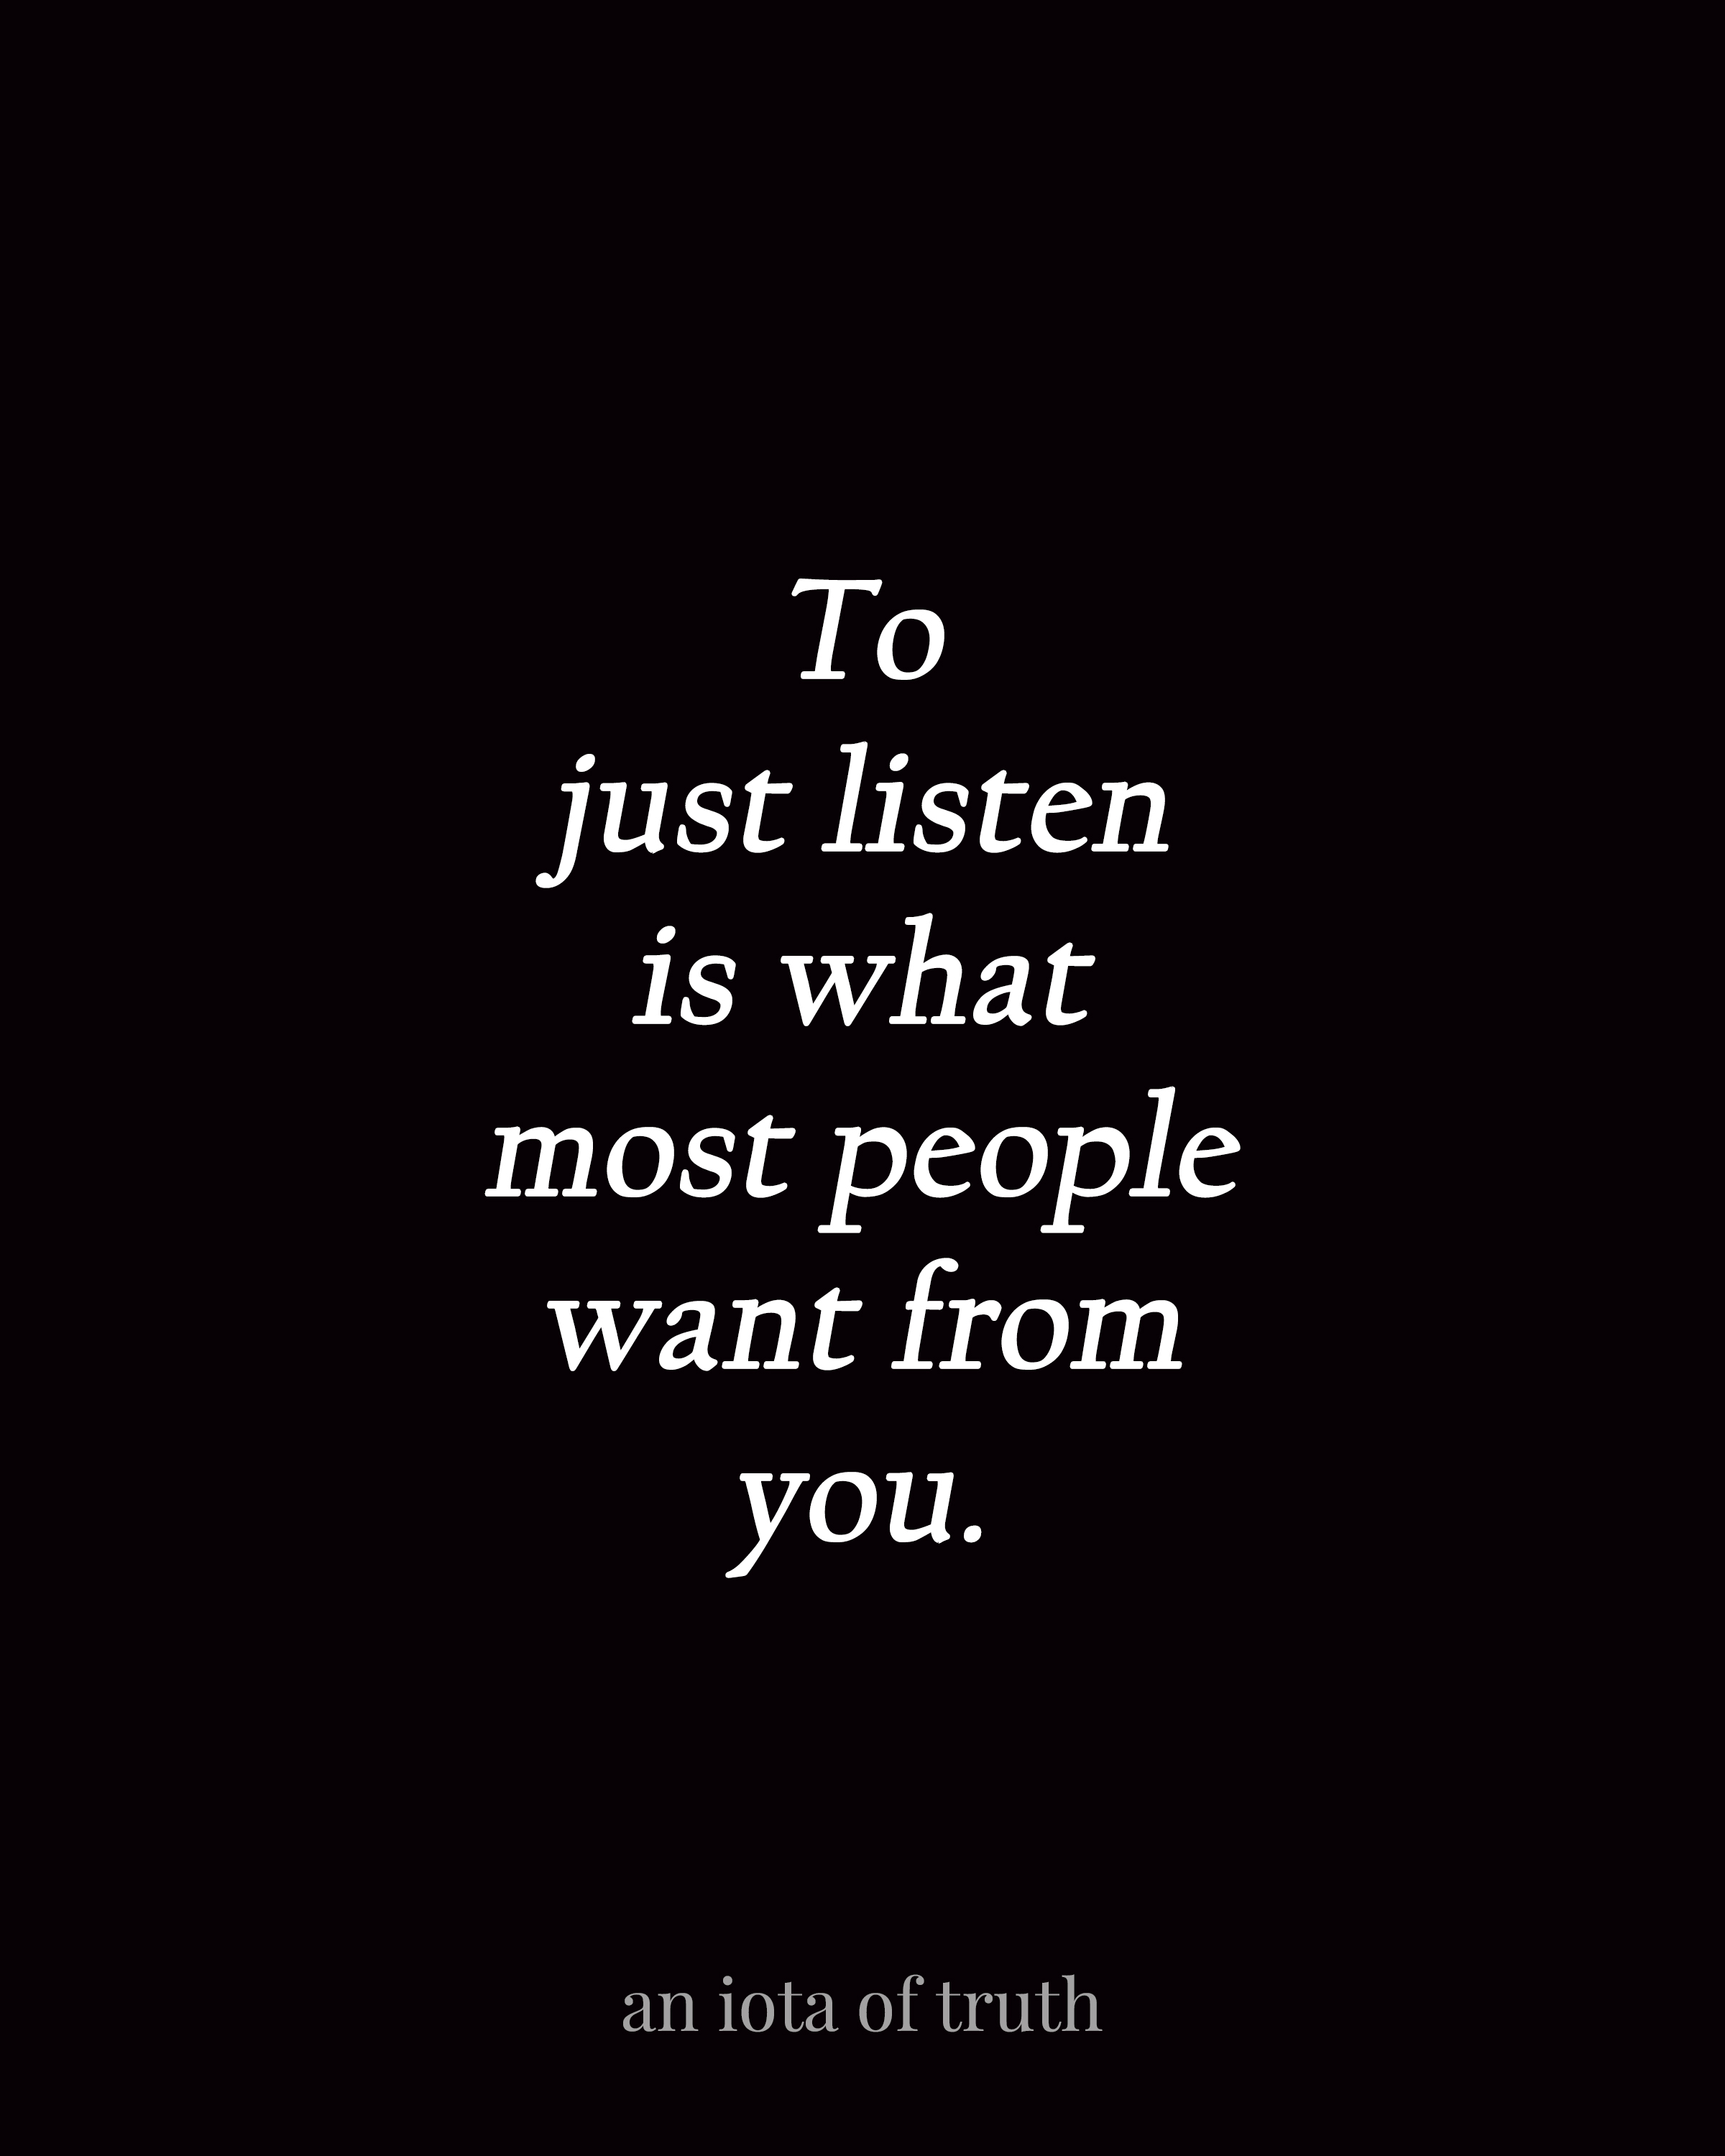 To just listen is what most people want from you.